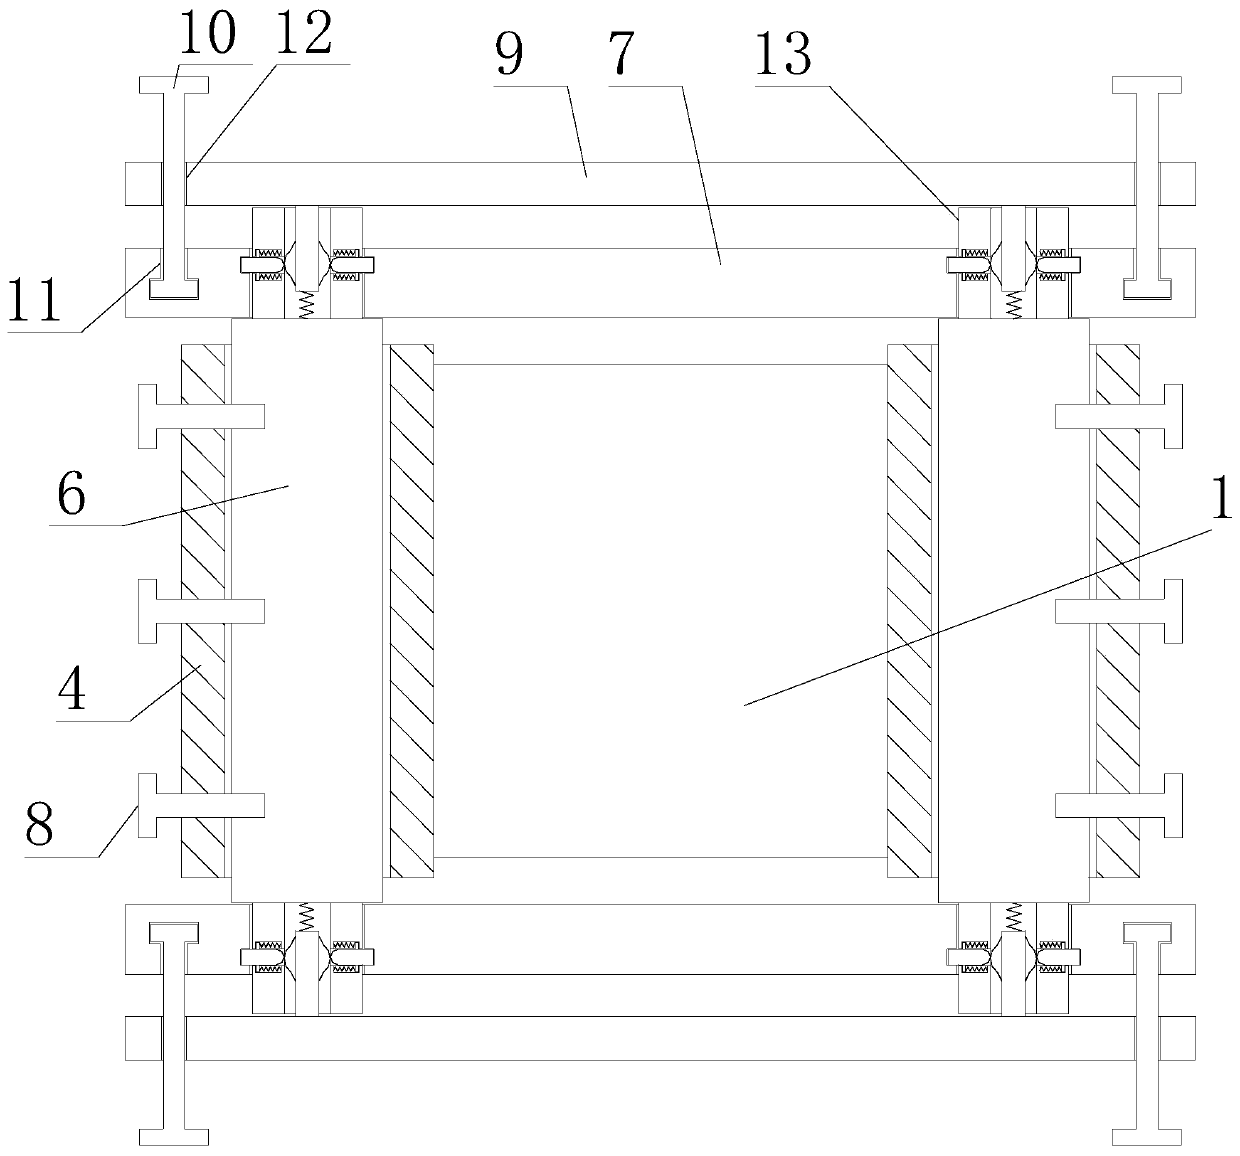 Hoisting and transporting device for aluminum plate coil